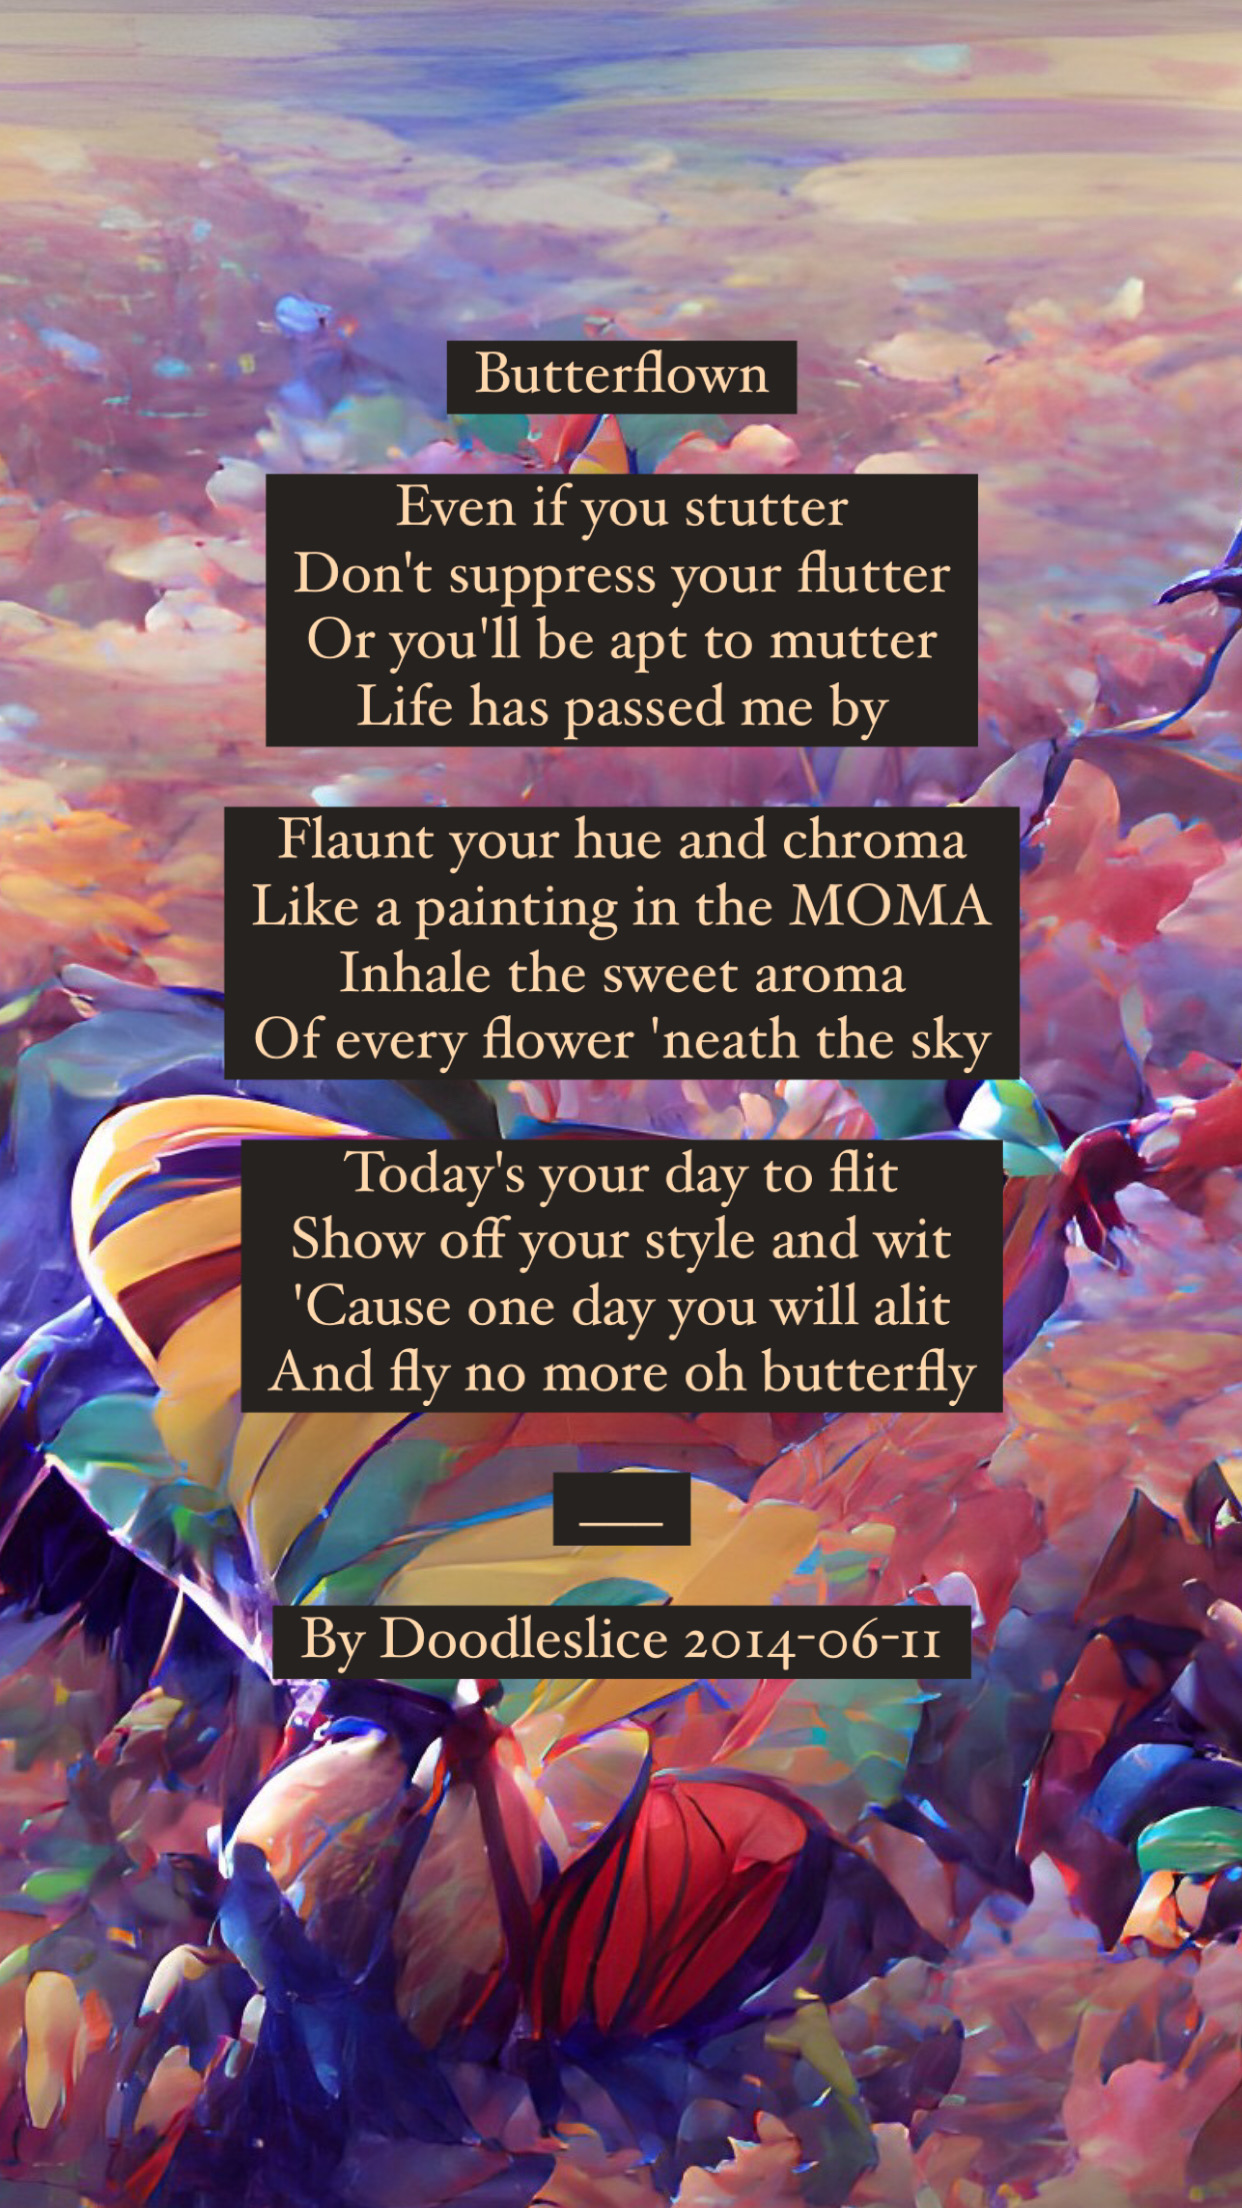 Butterflown - Poem and reading by Doodleslice